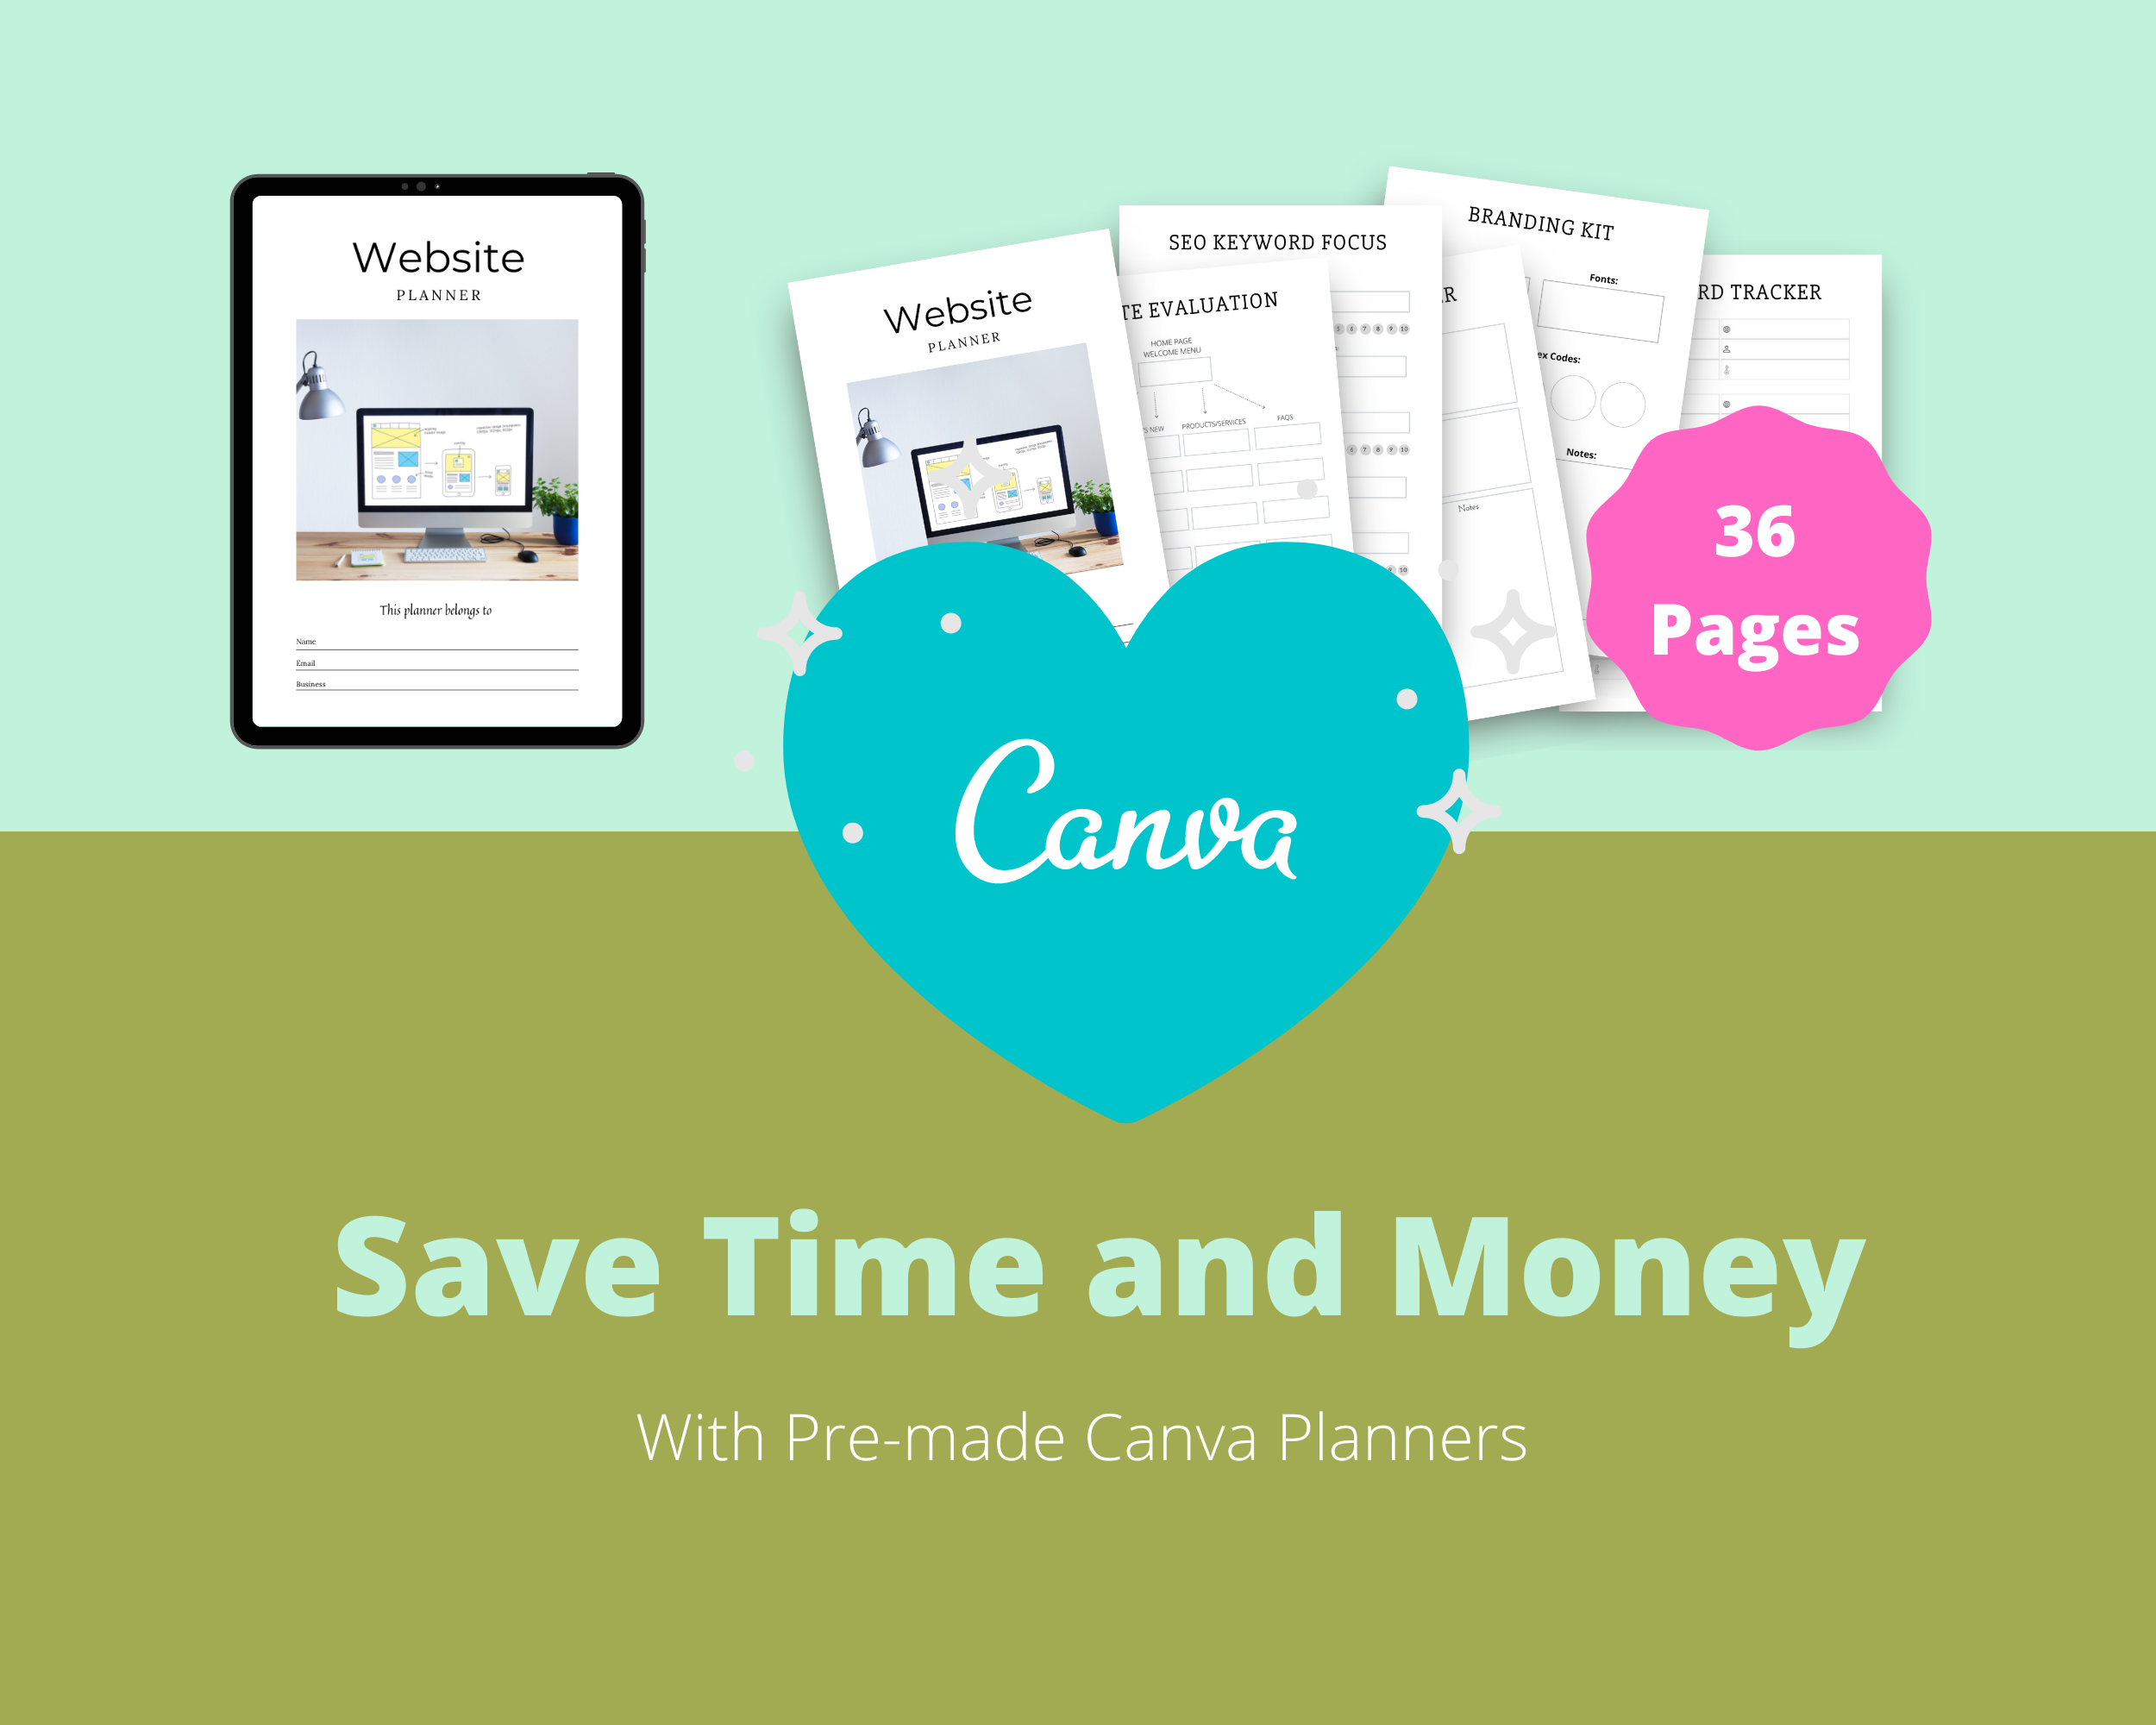 BUNDLE of 11 Marketing Planners in Canva | Customizable | Editable | Commercial Use | Marketing Templates